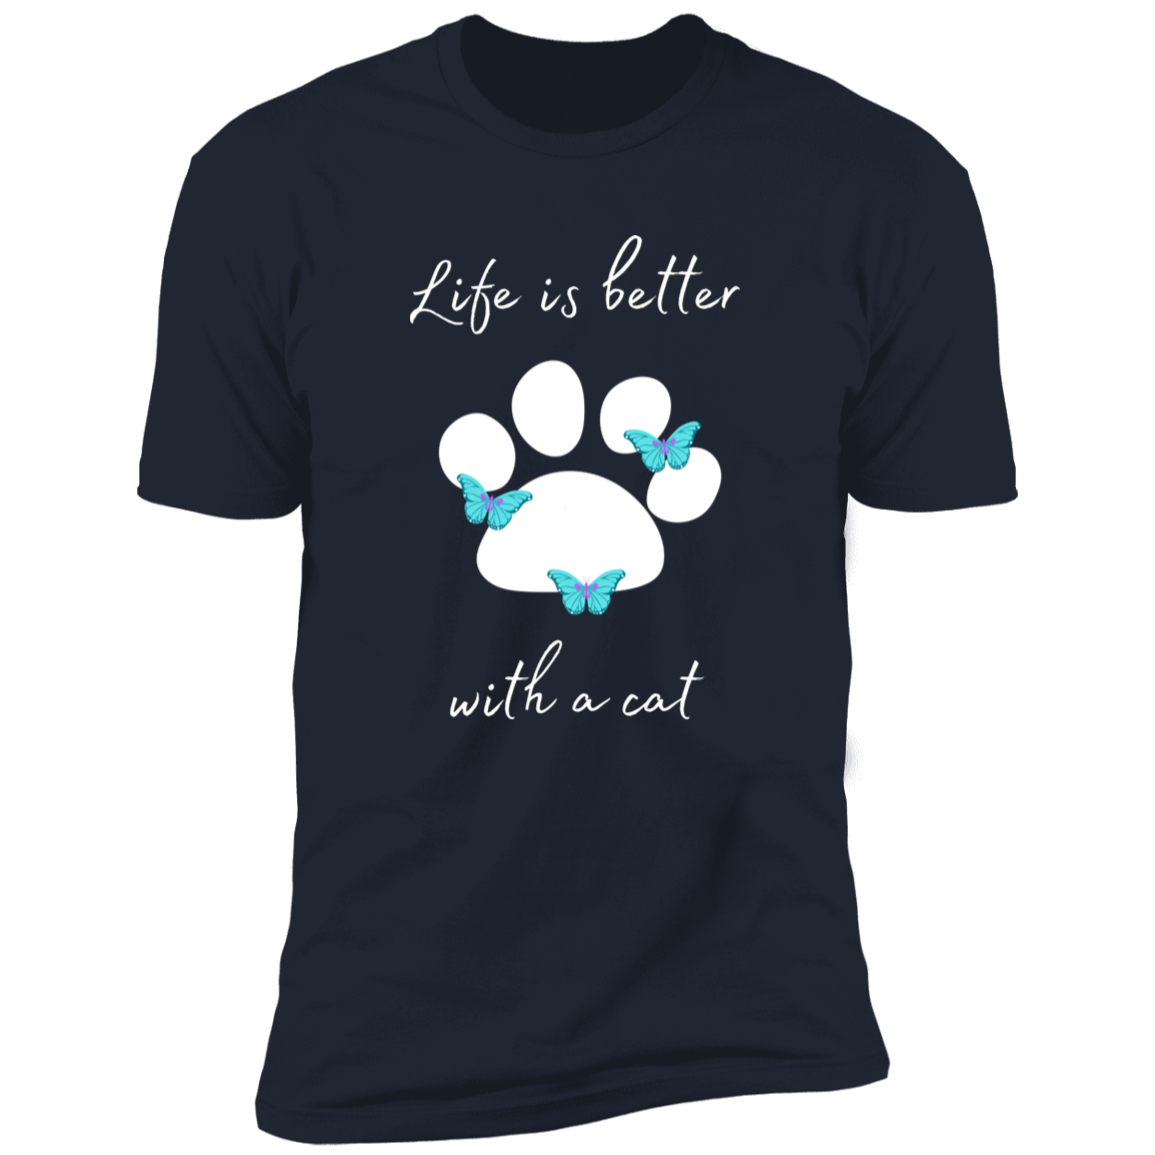 Life is Better with a Cat T-shirt, cat shirt for humans, Cat T-shirt in navy blue